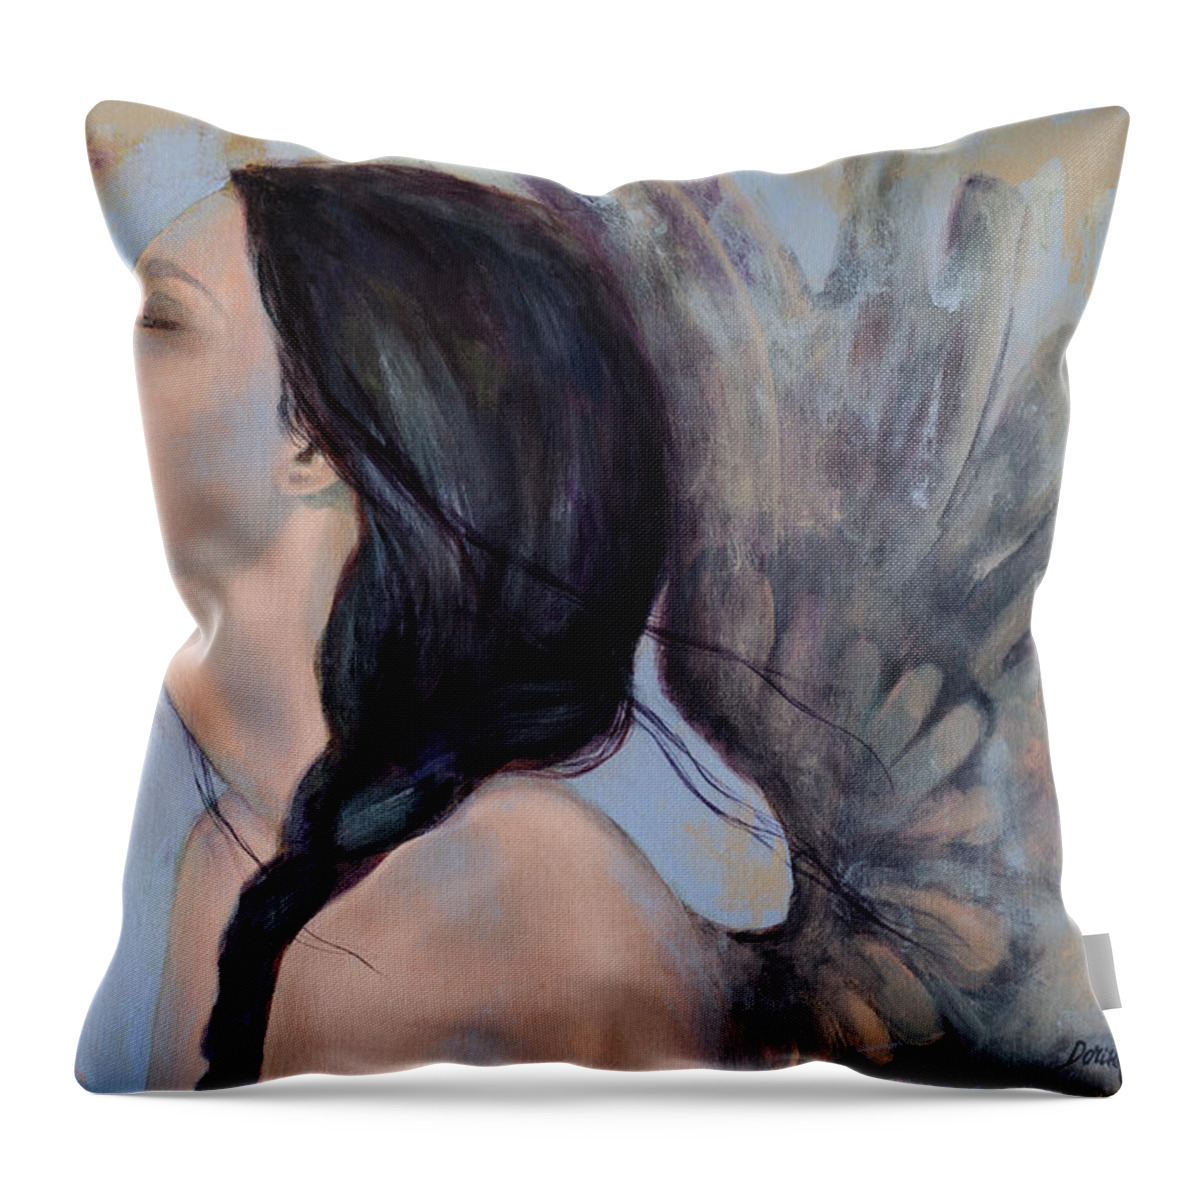 Art Throw Pillow featuring the painting With Ancient Love by Dorina Costras